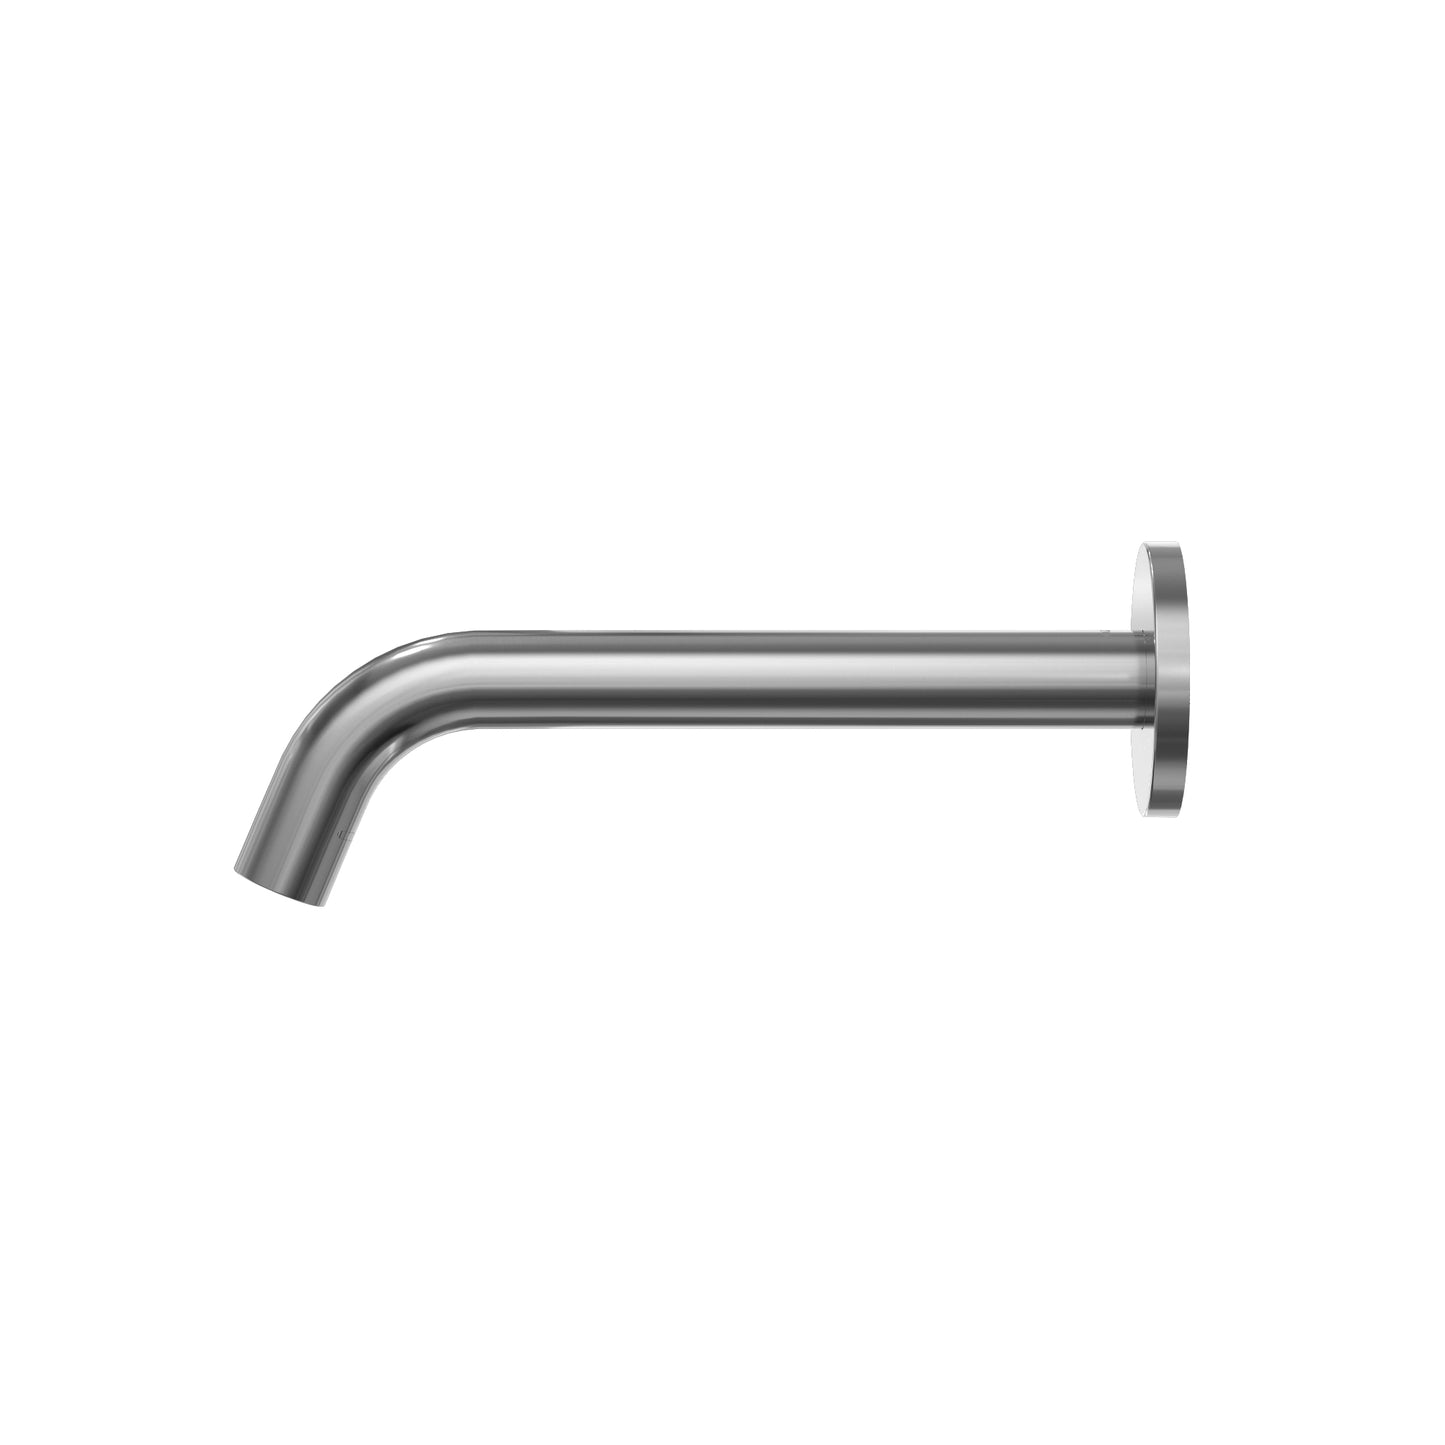 TLE26010U1#CP - EcoPower 0.50 GPM Helix Touchless Wall Mount Faucet - Chrome